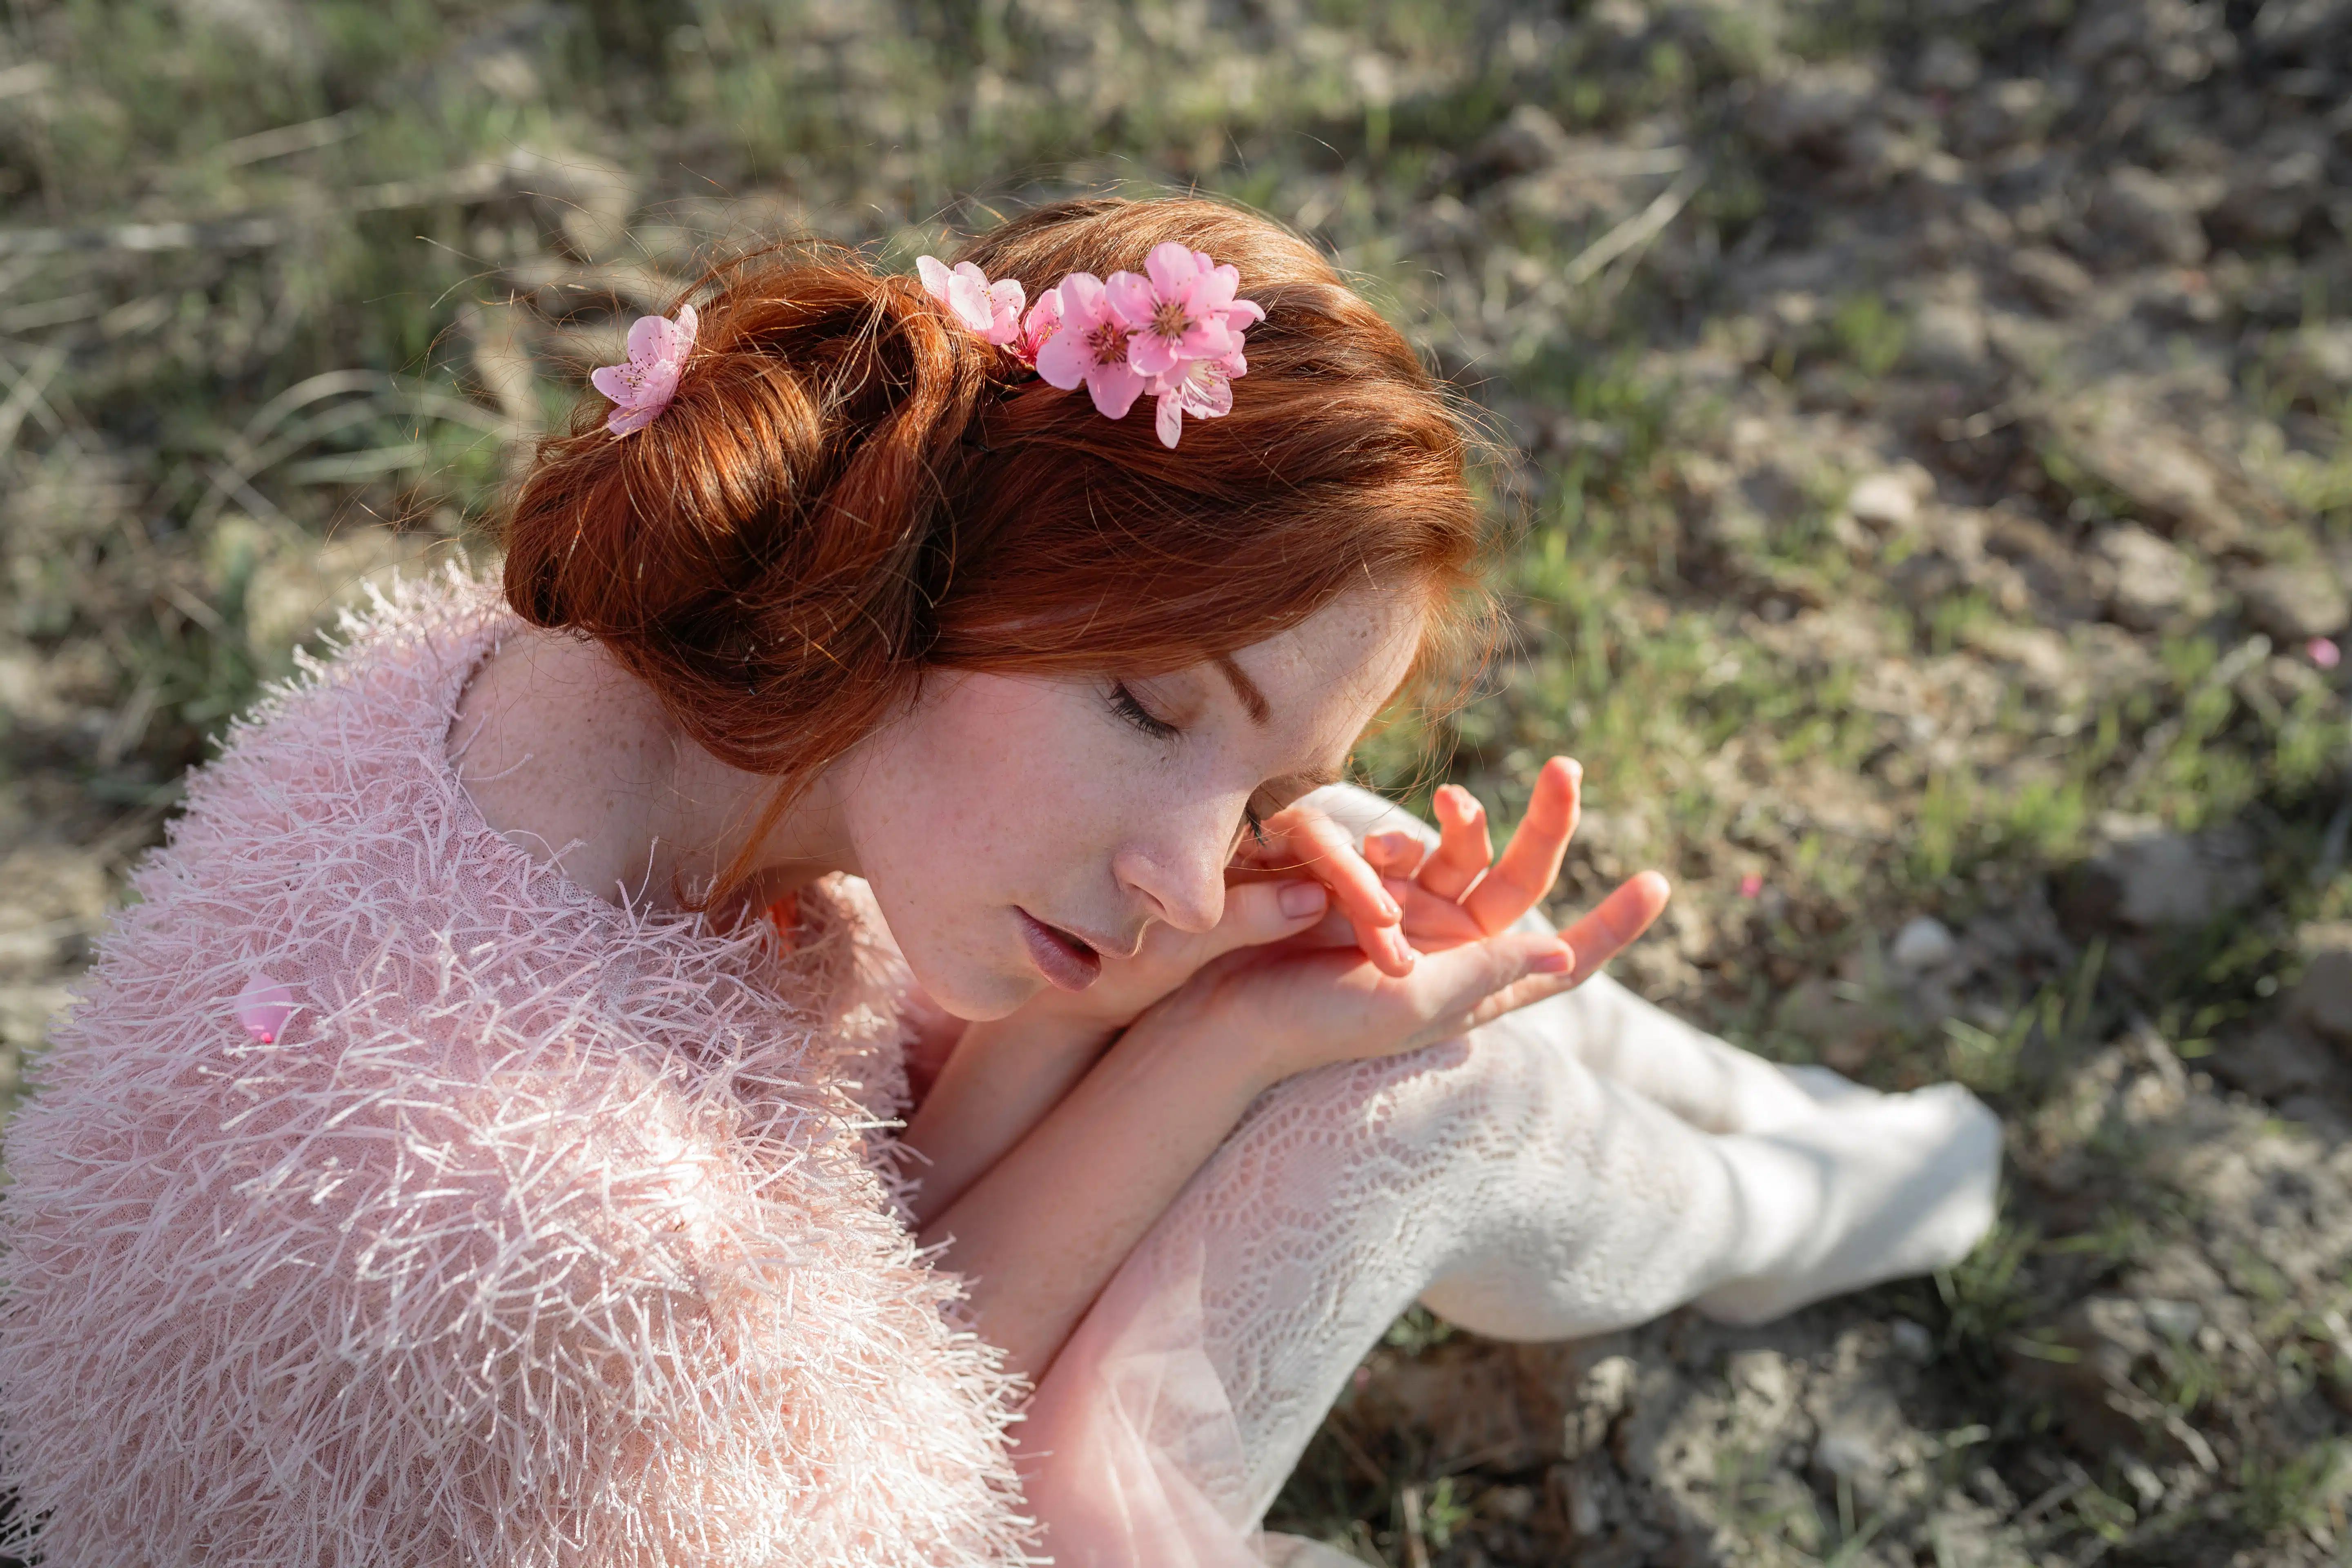 young girl with red hair in a gentle peach garden, which blossomed